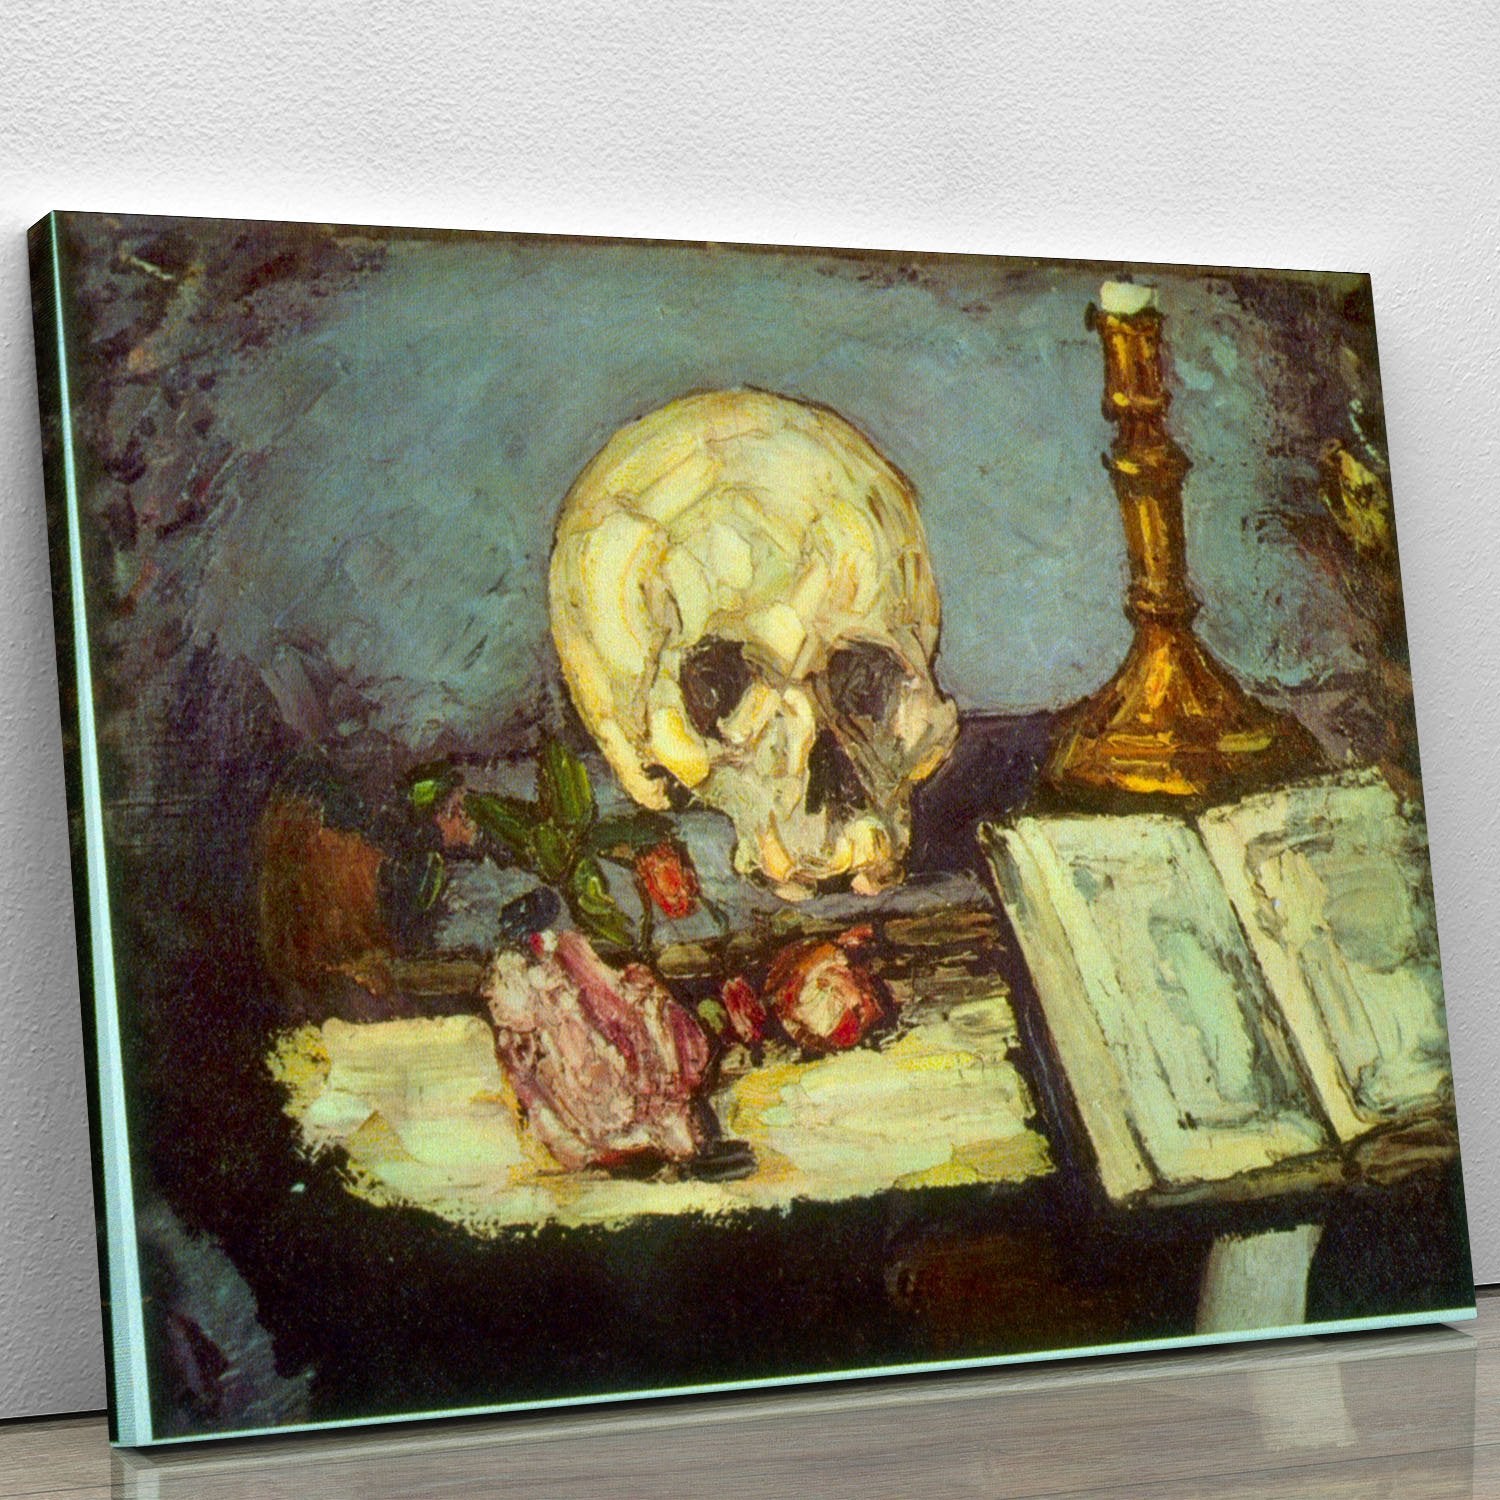 Skull by Degas Canvas Print or Poster